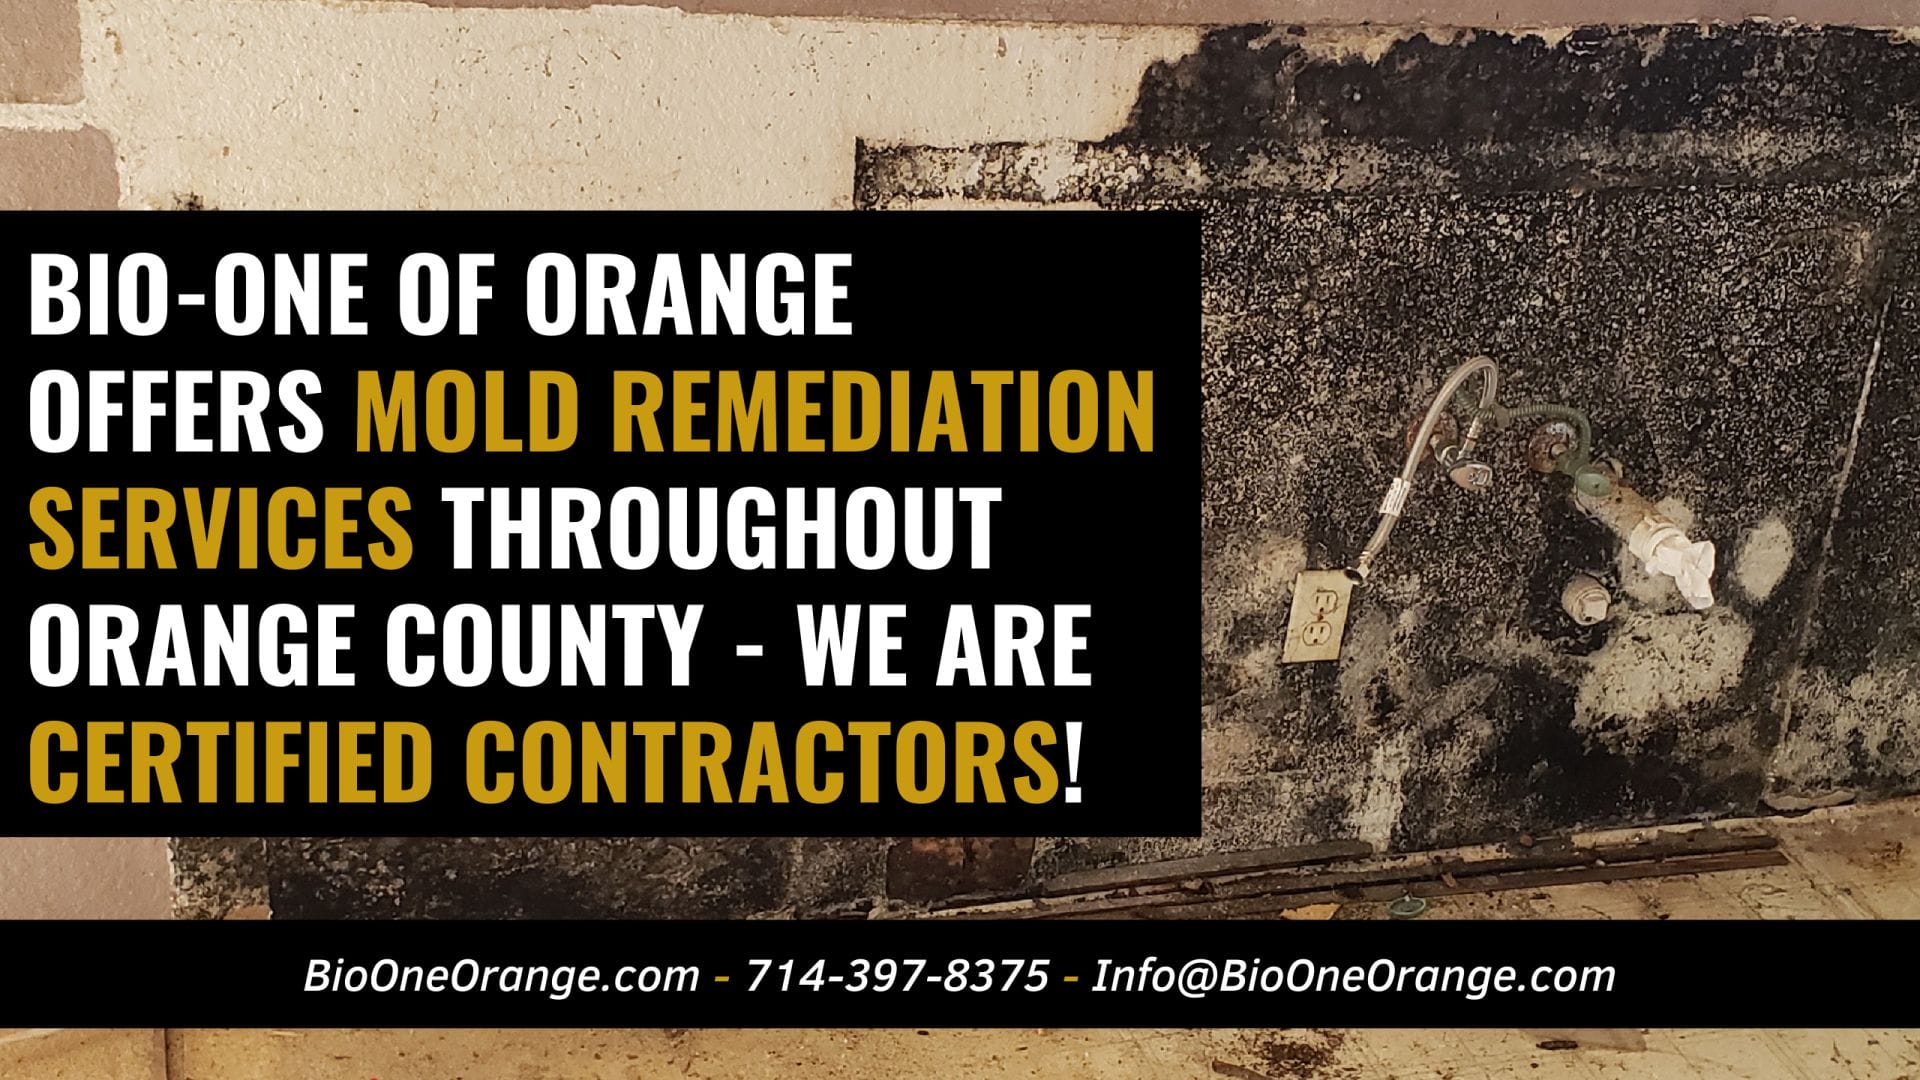 Bio-One of Orange offers mold remediation services throughout Orange County - We are Micro Certified Mold Remediation Contractors! 